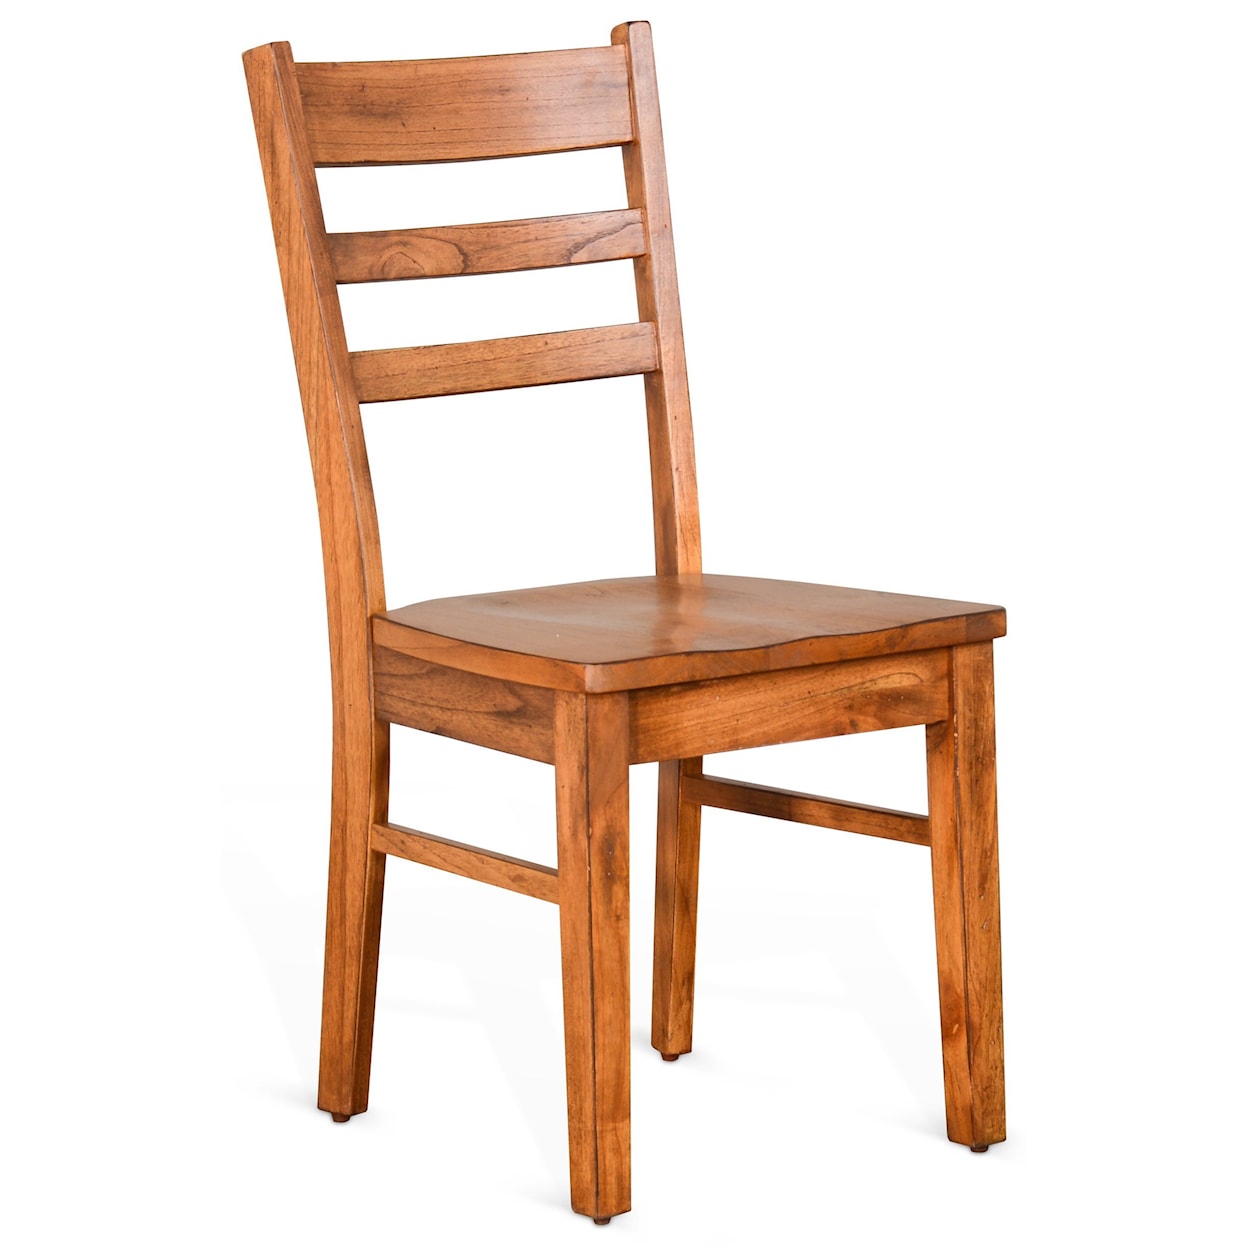 Sunny Designs Sedona 2 Ladderback Chair with Wood Seat